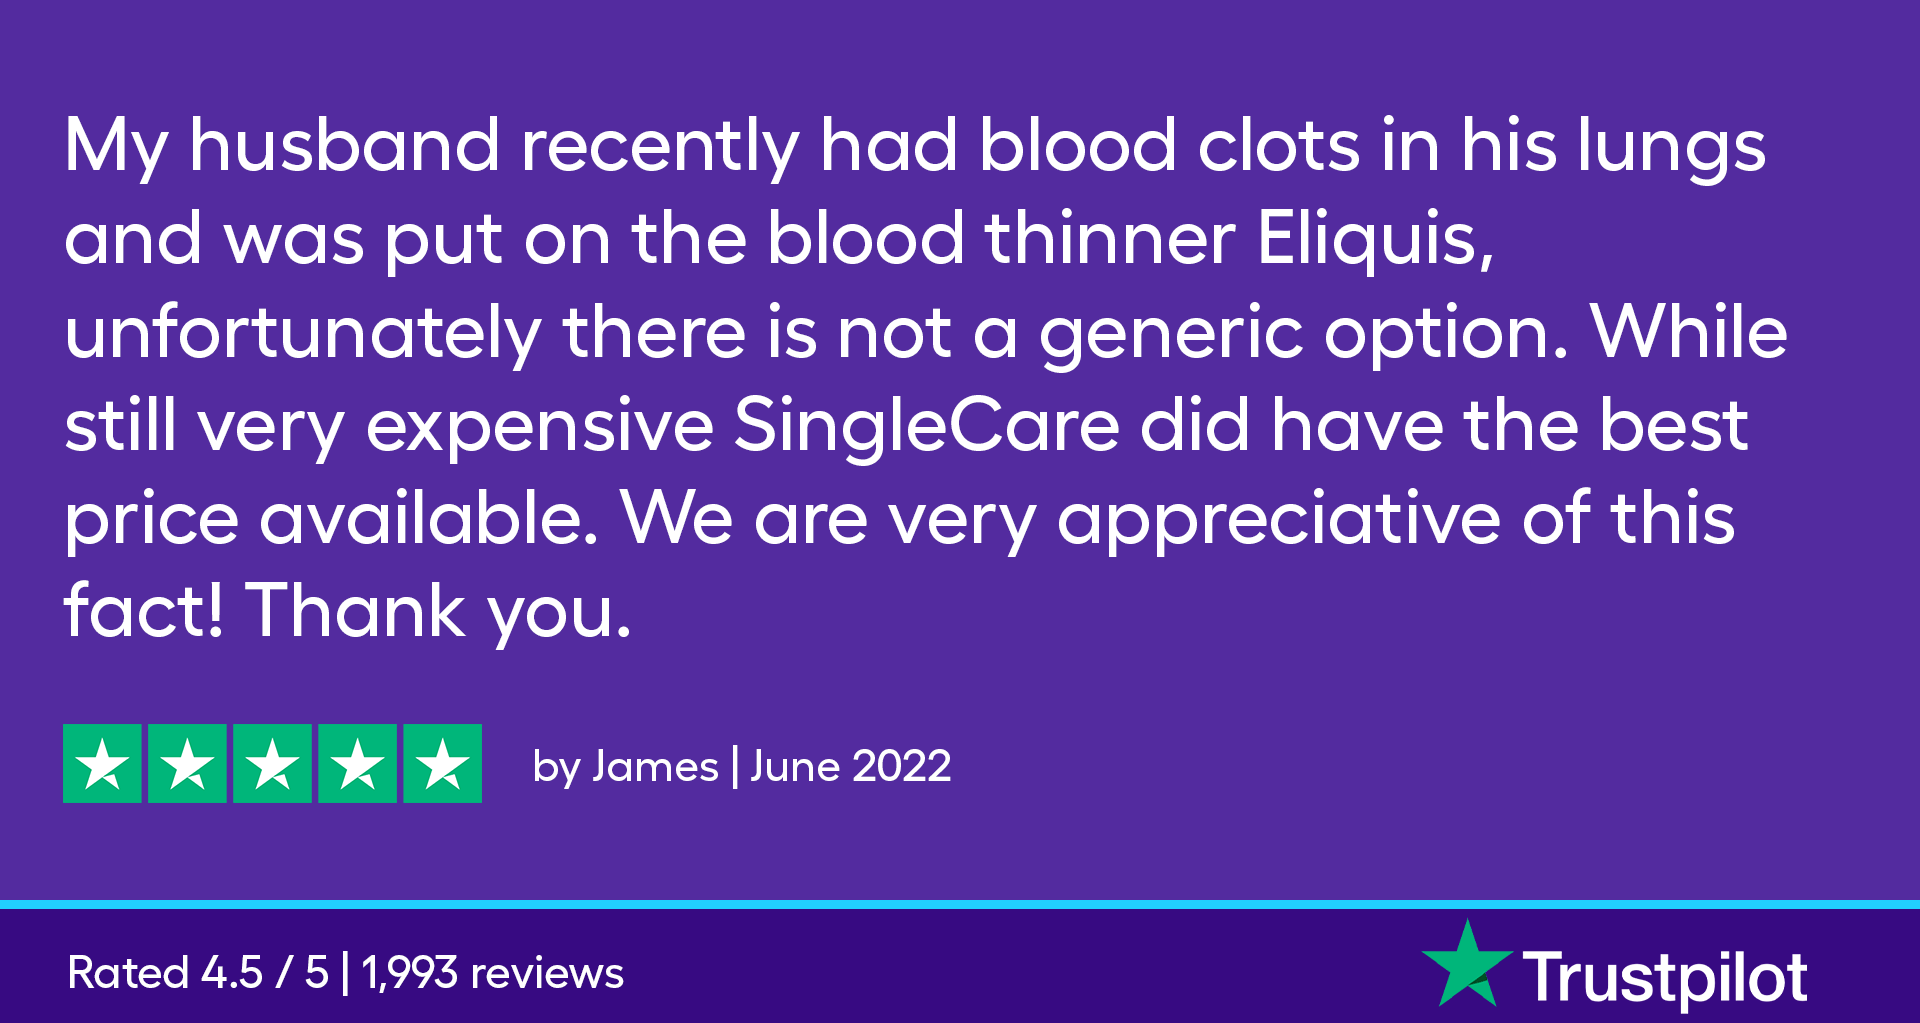 My husband recently had blood clots in his lungs and was put on the blood thinner Eliquis, unfortunately there is not a generic option. While still very expensive SingleCare did have the best price available. We are very appreciative of this fact! Thank you.